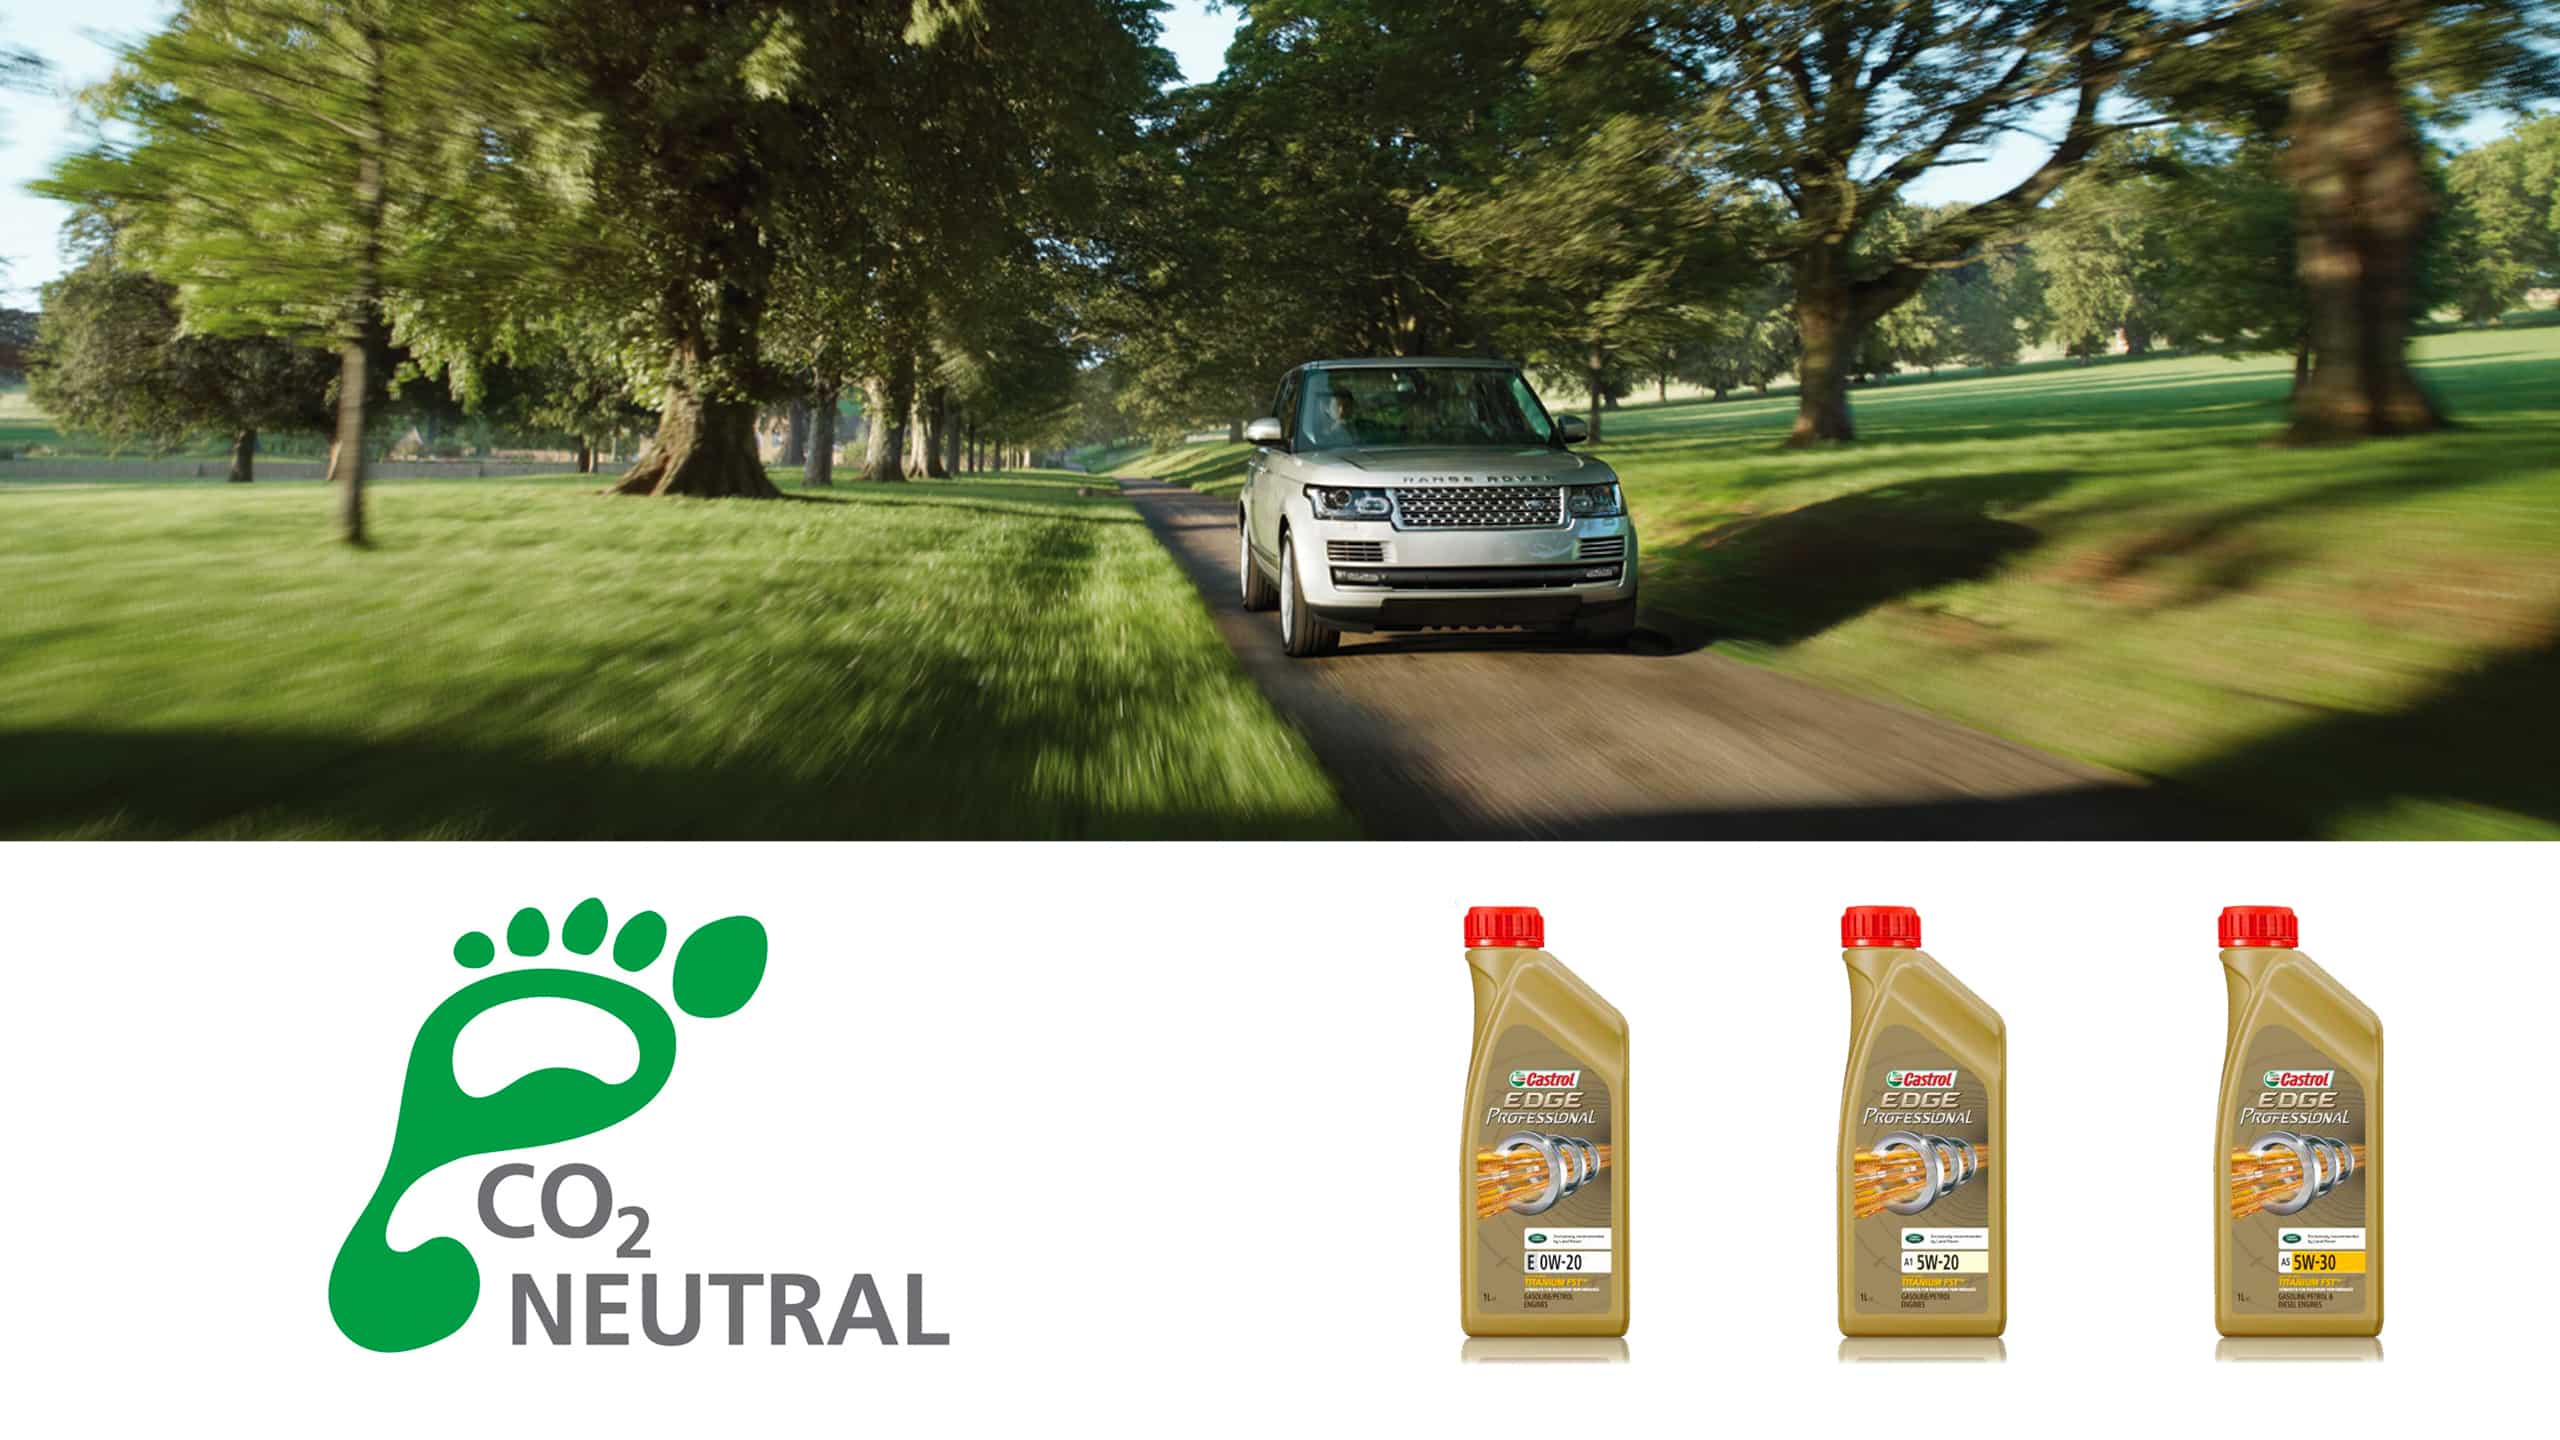 Landrover Rangerover castrol oil with co2 emission advertisement 